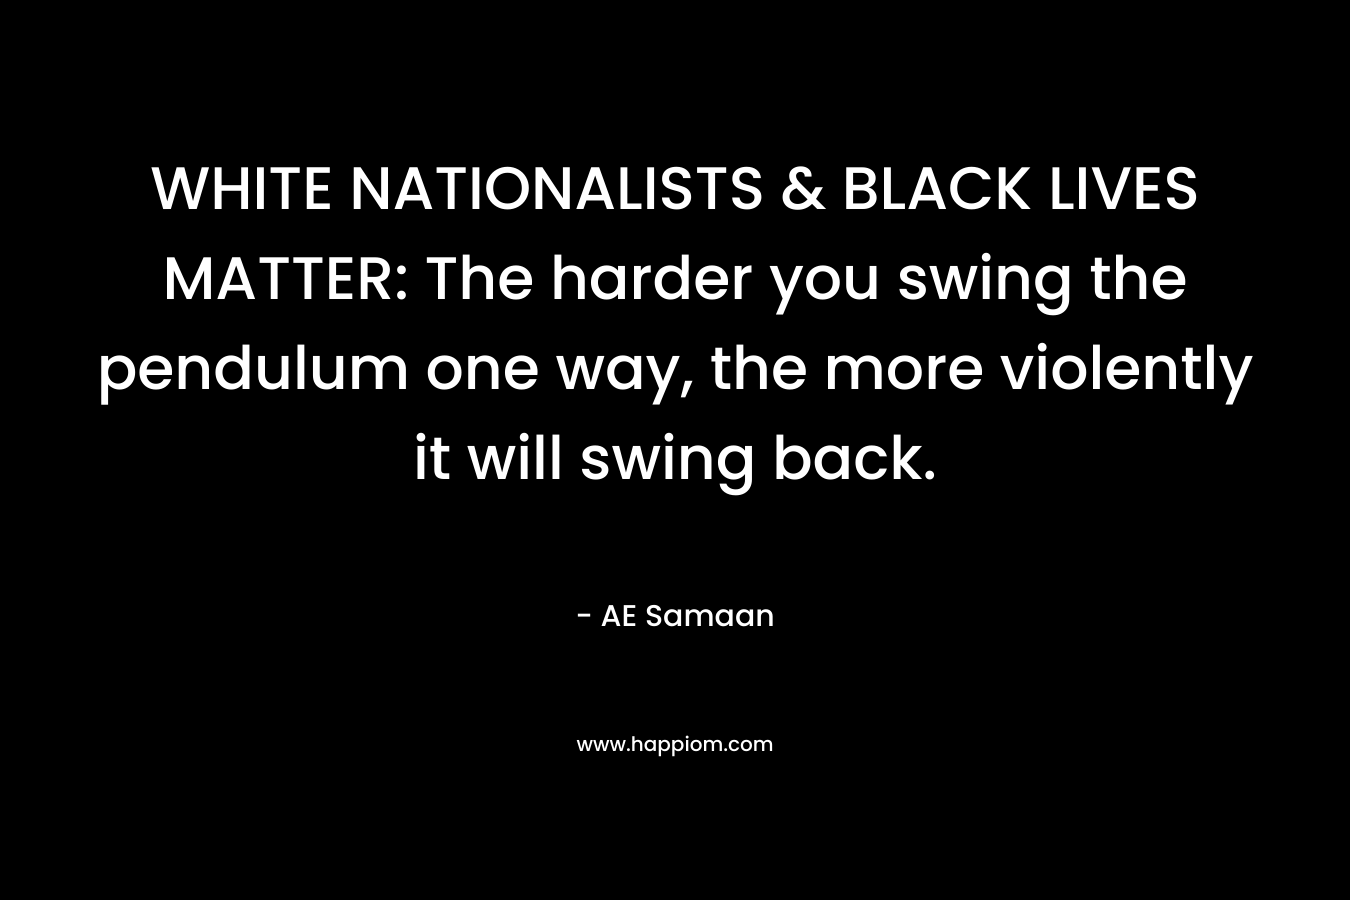 WHITE NATIONALISTS & BLACK LIVES MATTER: The harder you swing the pendulum one way, the more violently it will swing back. – AE Samaan